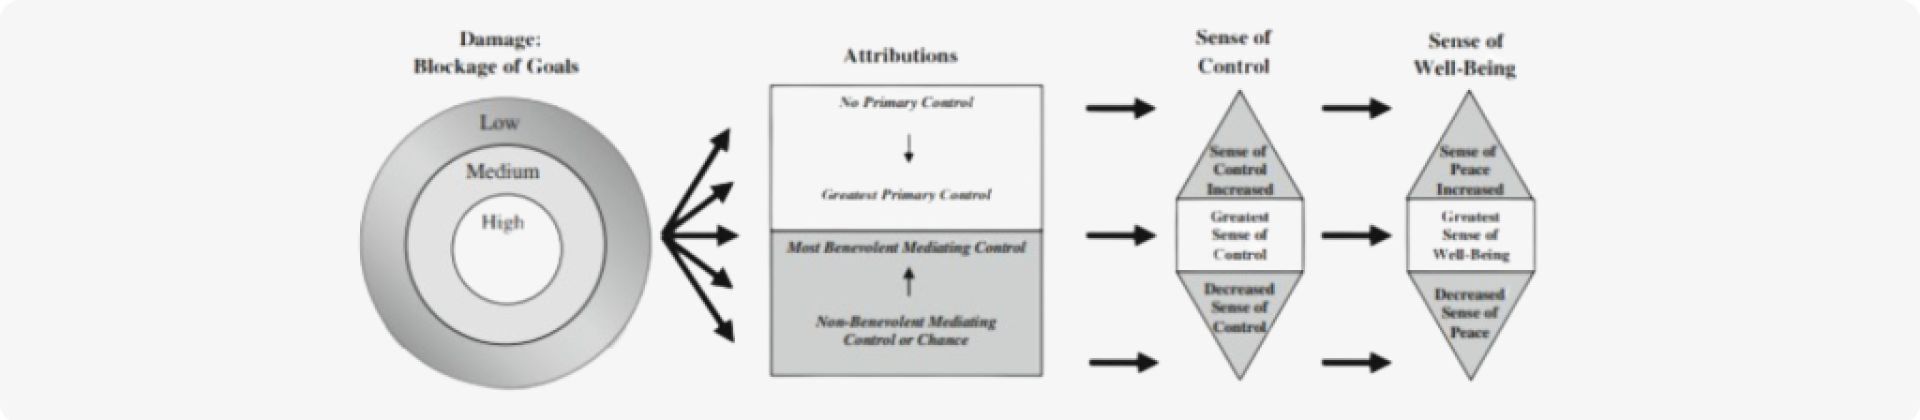 Goodin’s Attribution control model of well-being for handling Life's Unexpected Twists